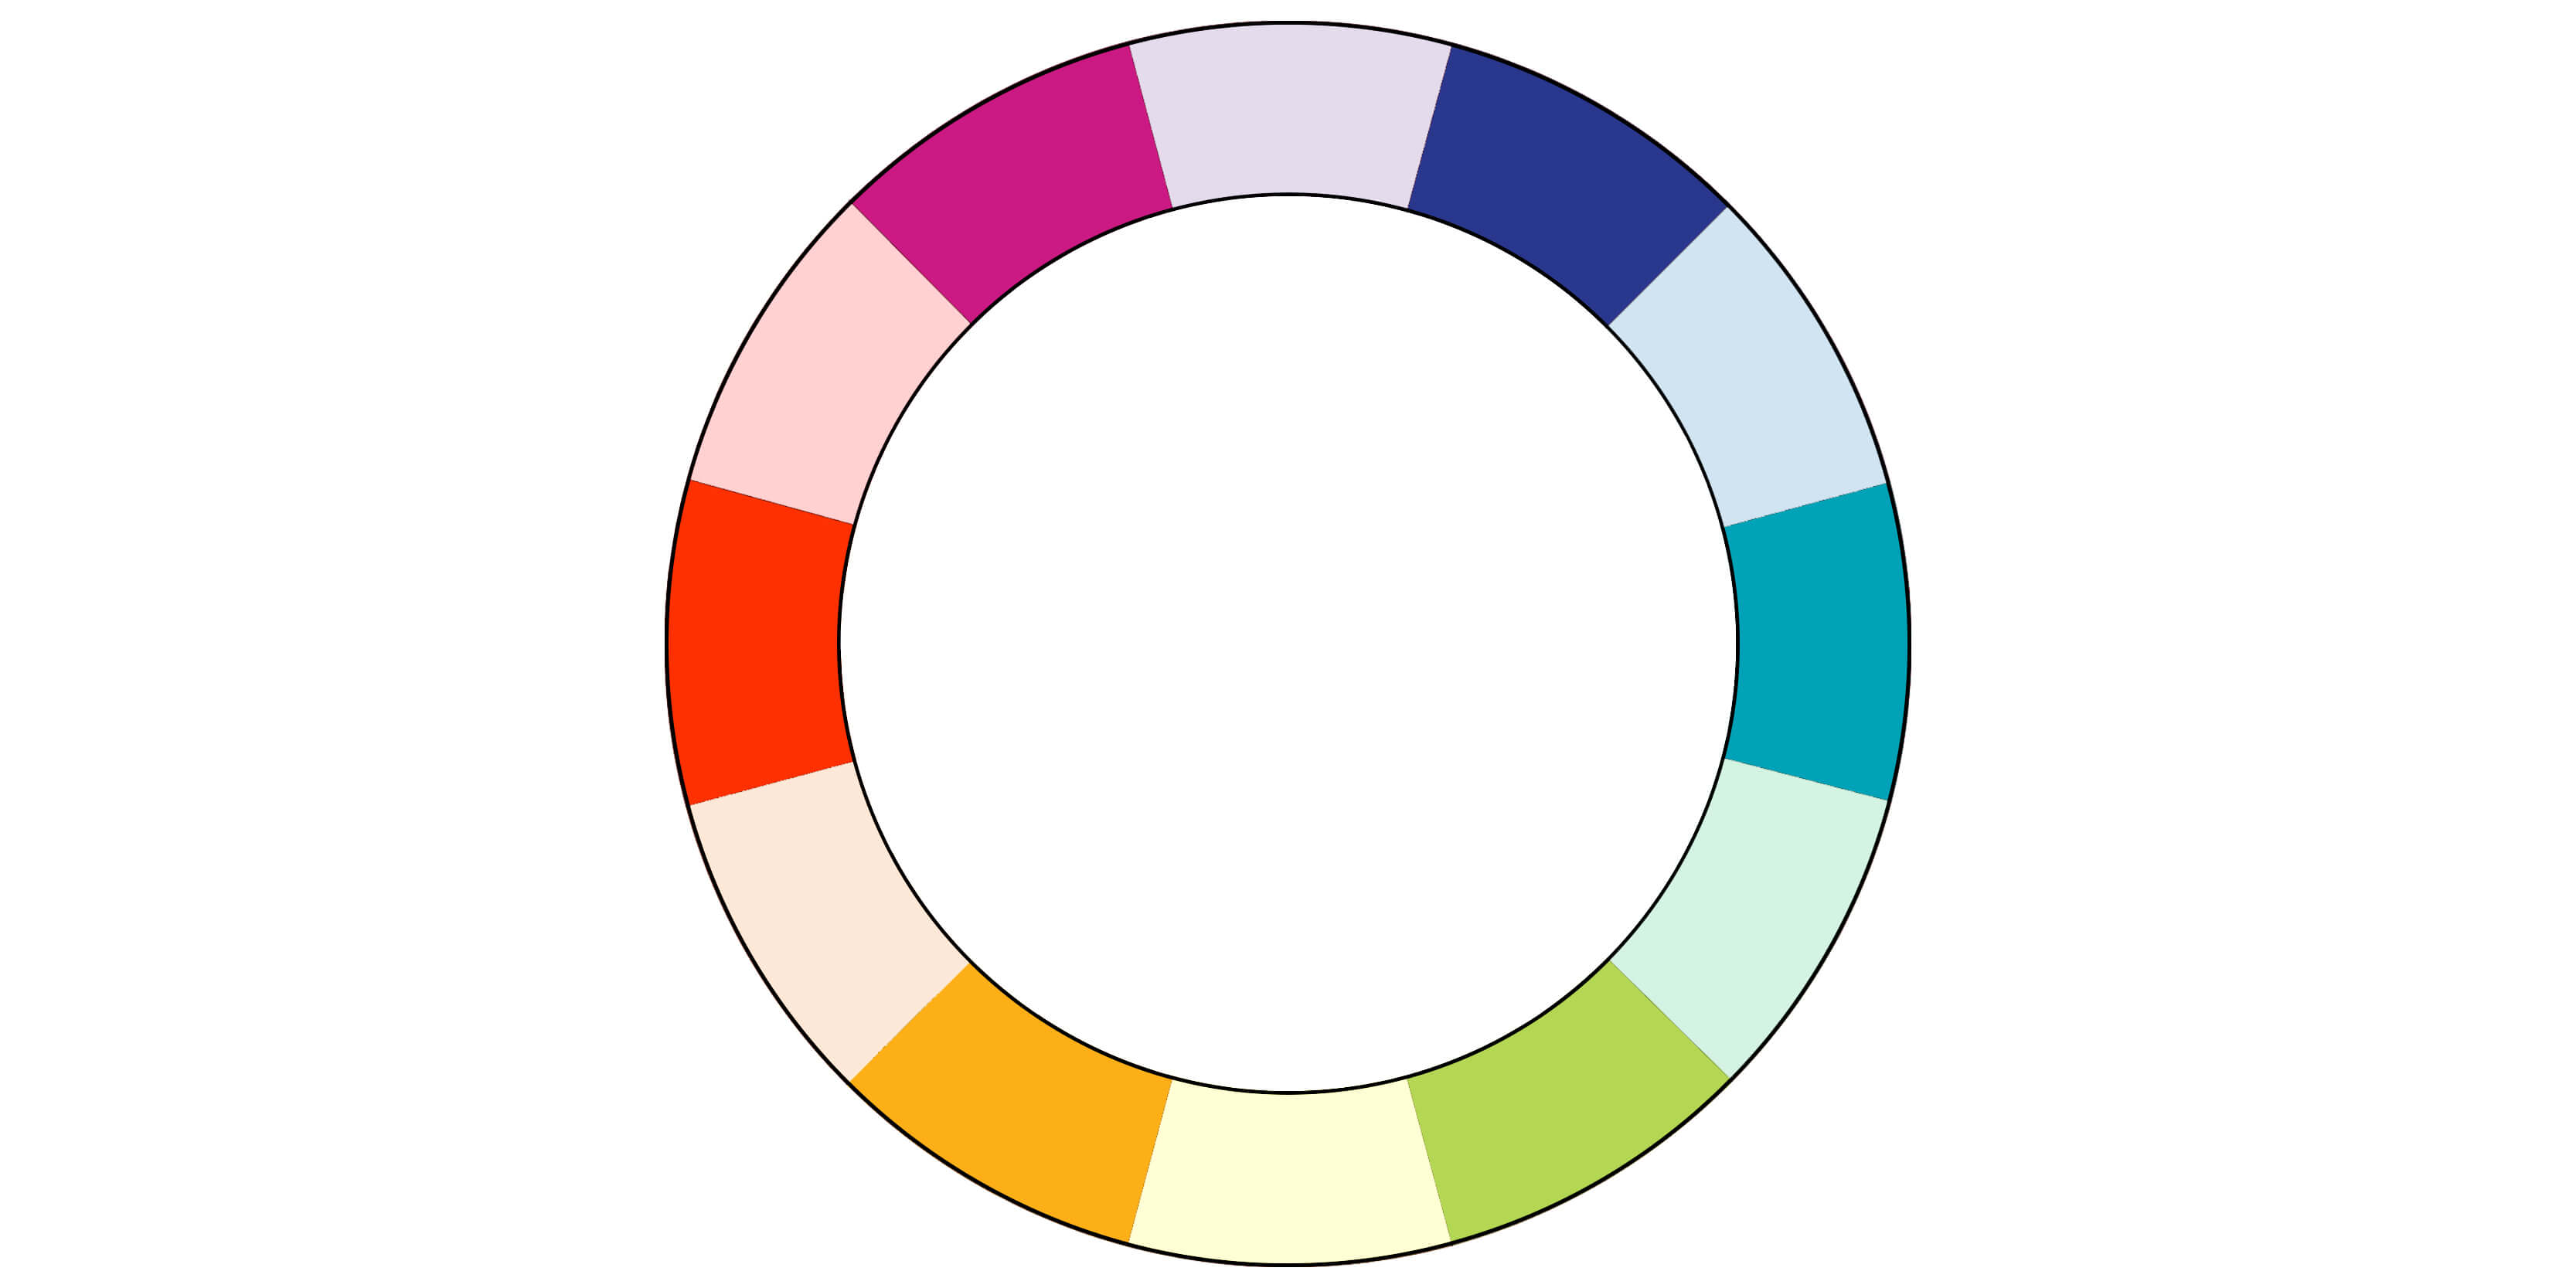 Tertiary colours - How to create a perfect modern color scheme for your website - Image